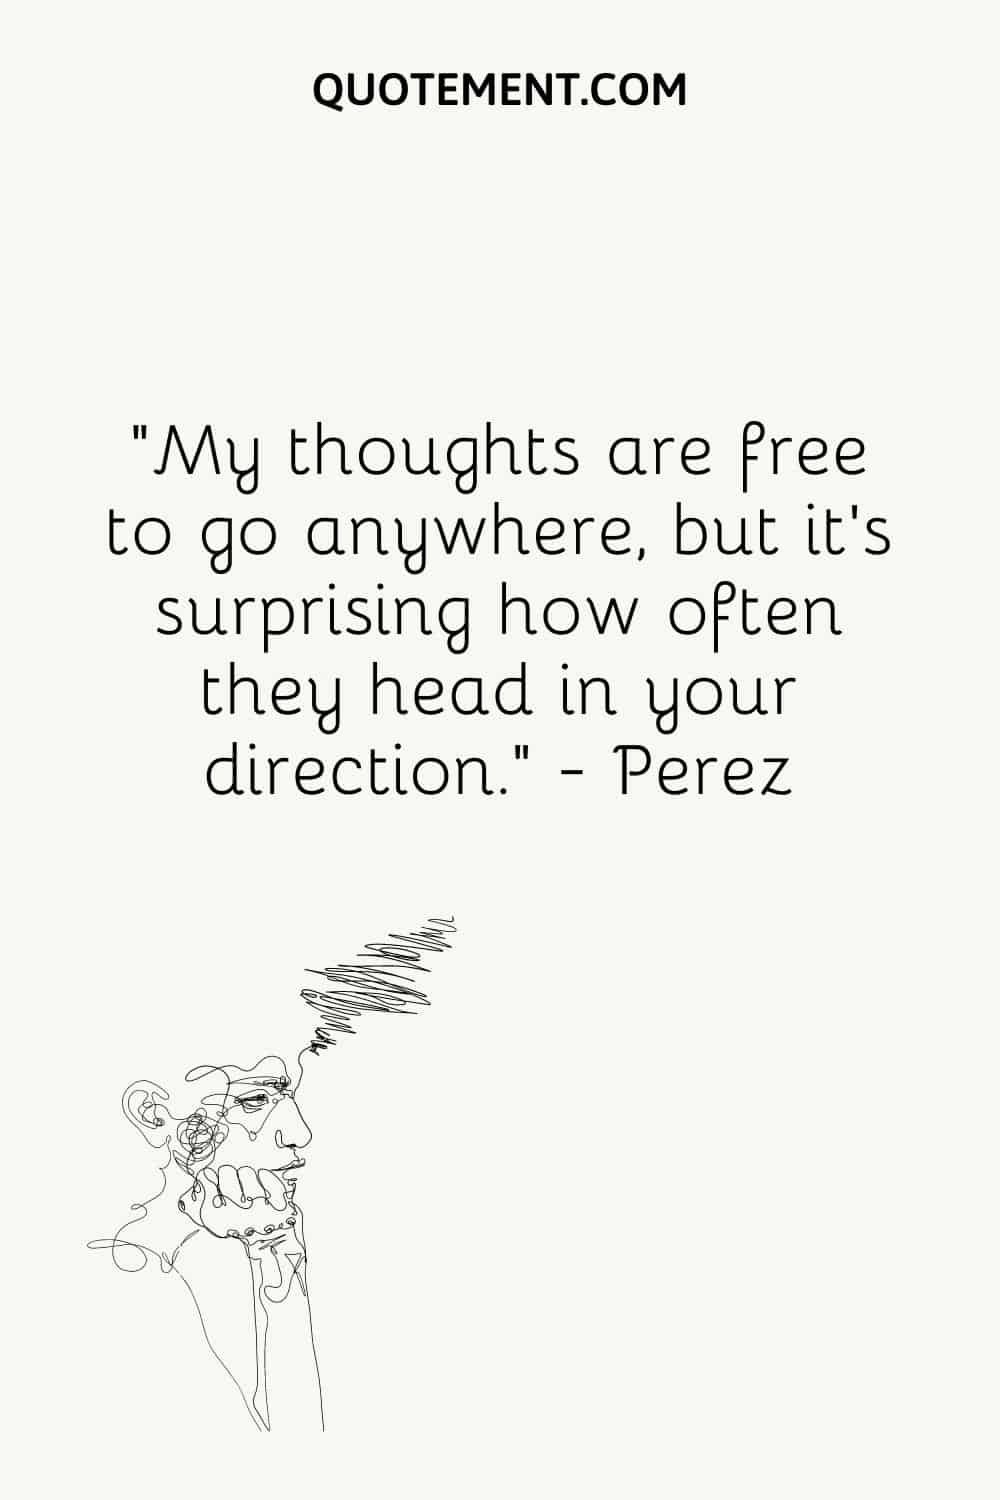 “My thoughts are free to go anywhere, but it’s surprising how often they head in your direction.” — Perez